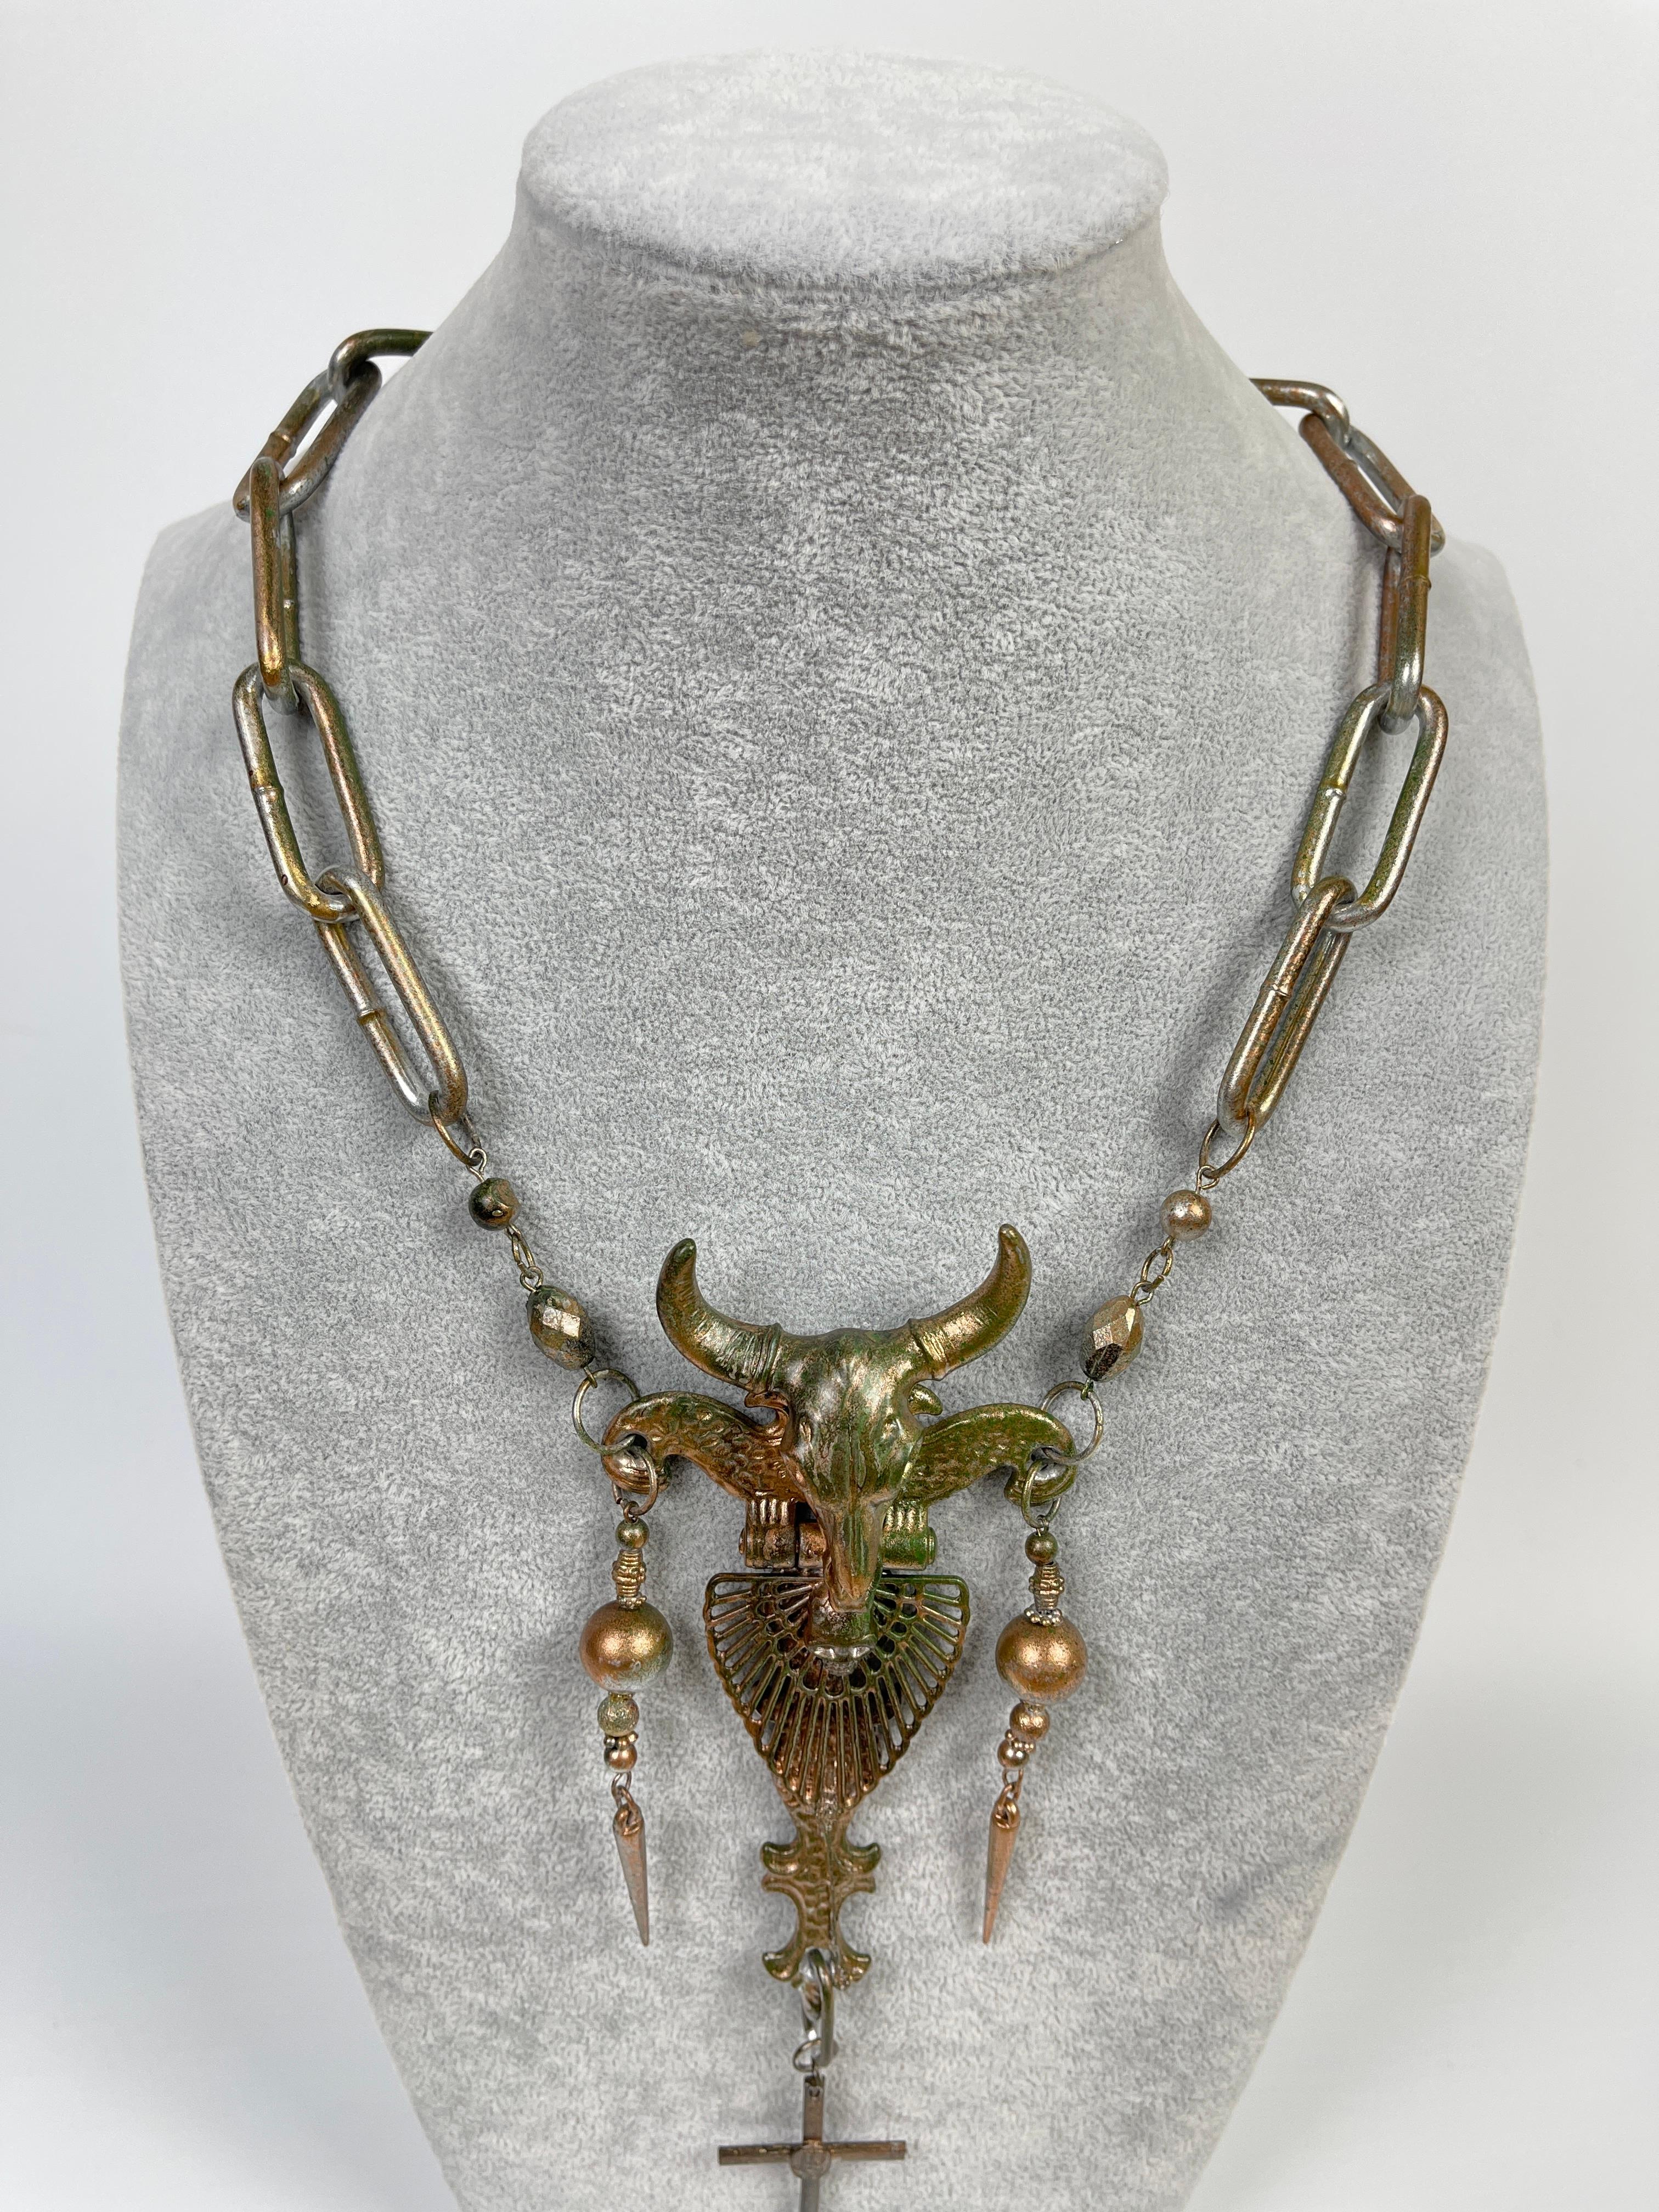 Jean Paul Gaultier 1990's Staff Sample Rosario Bull Necklace In Excellent Condition For Sale In Seattle, WA